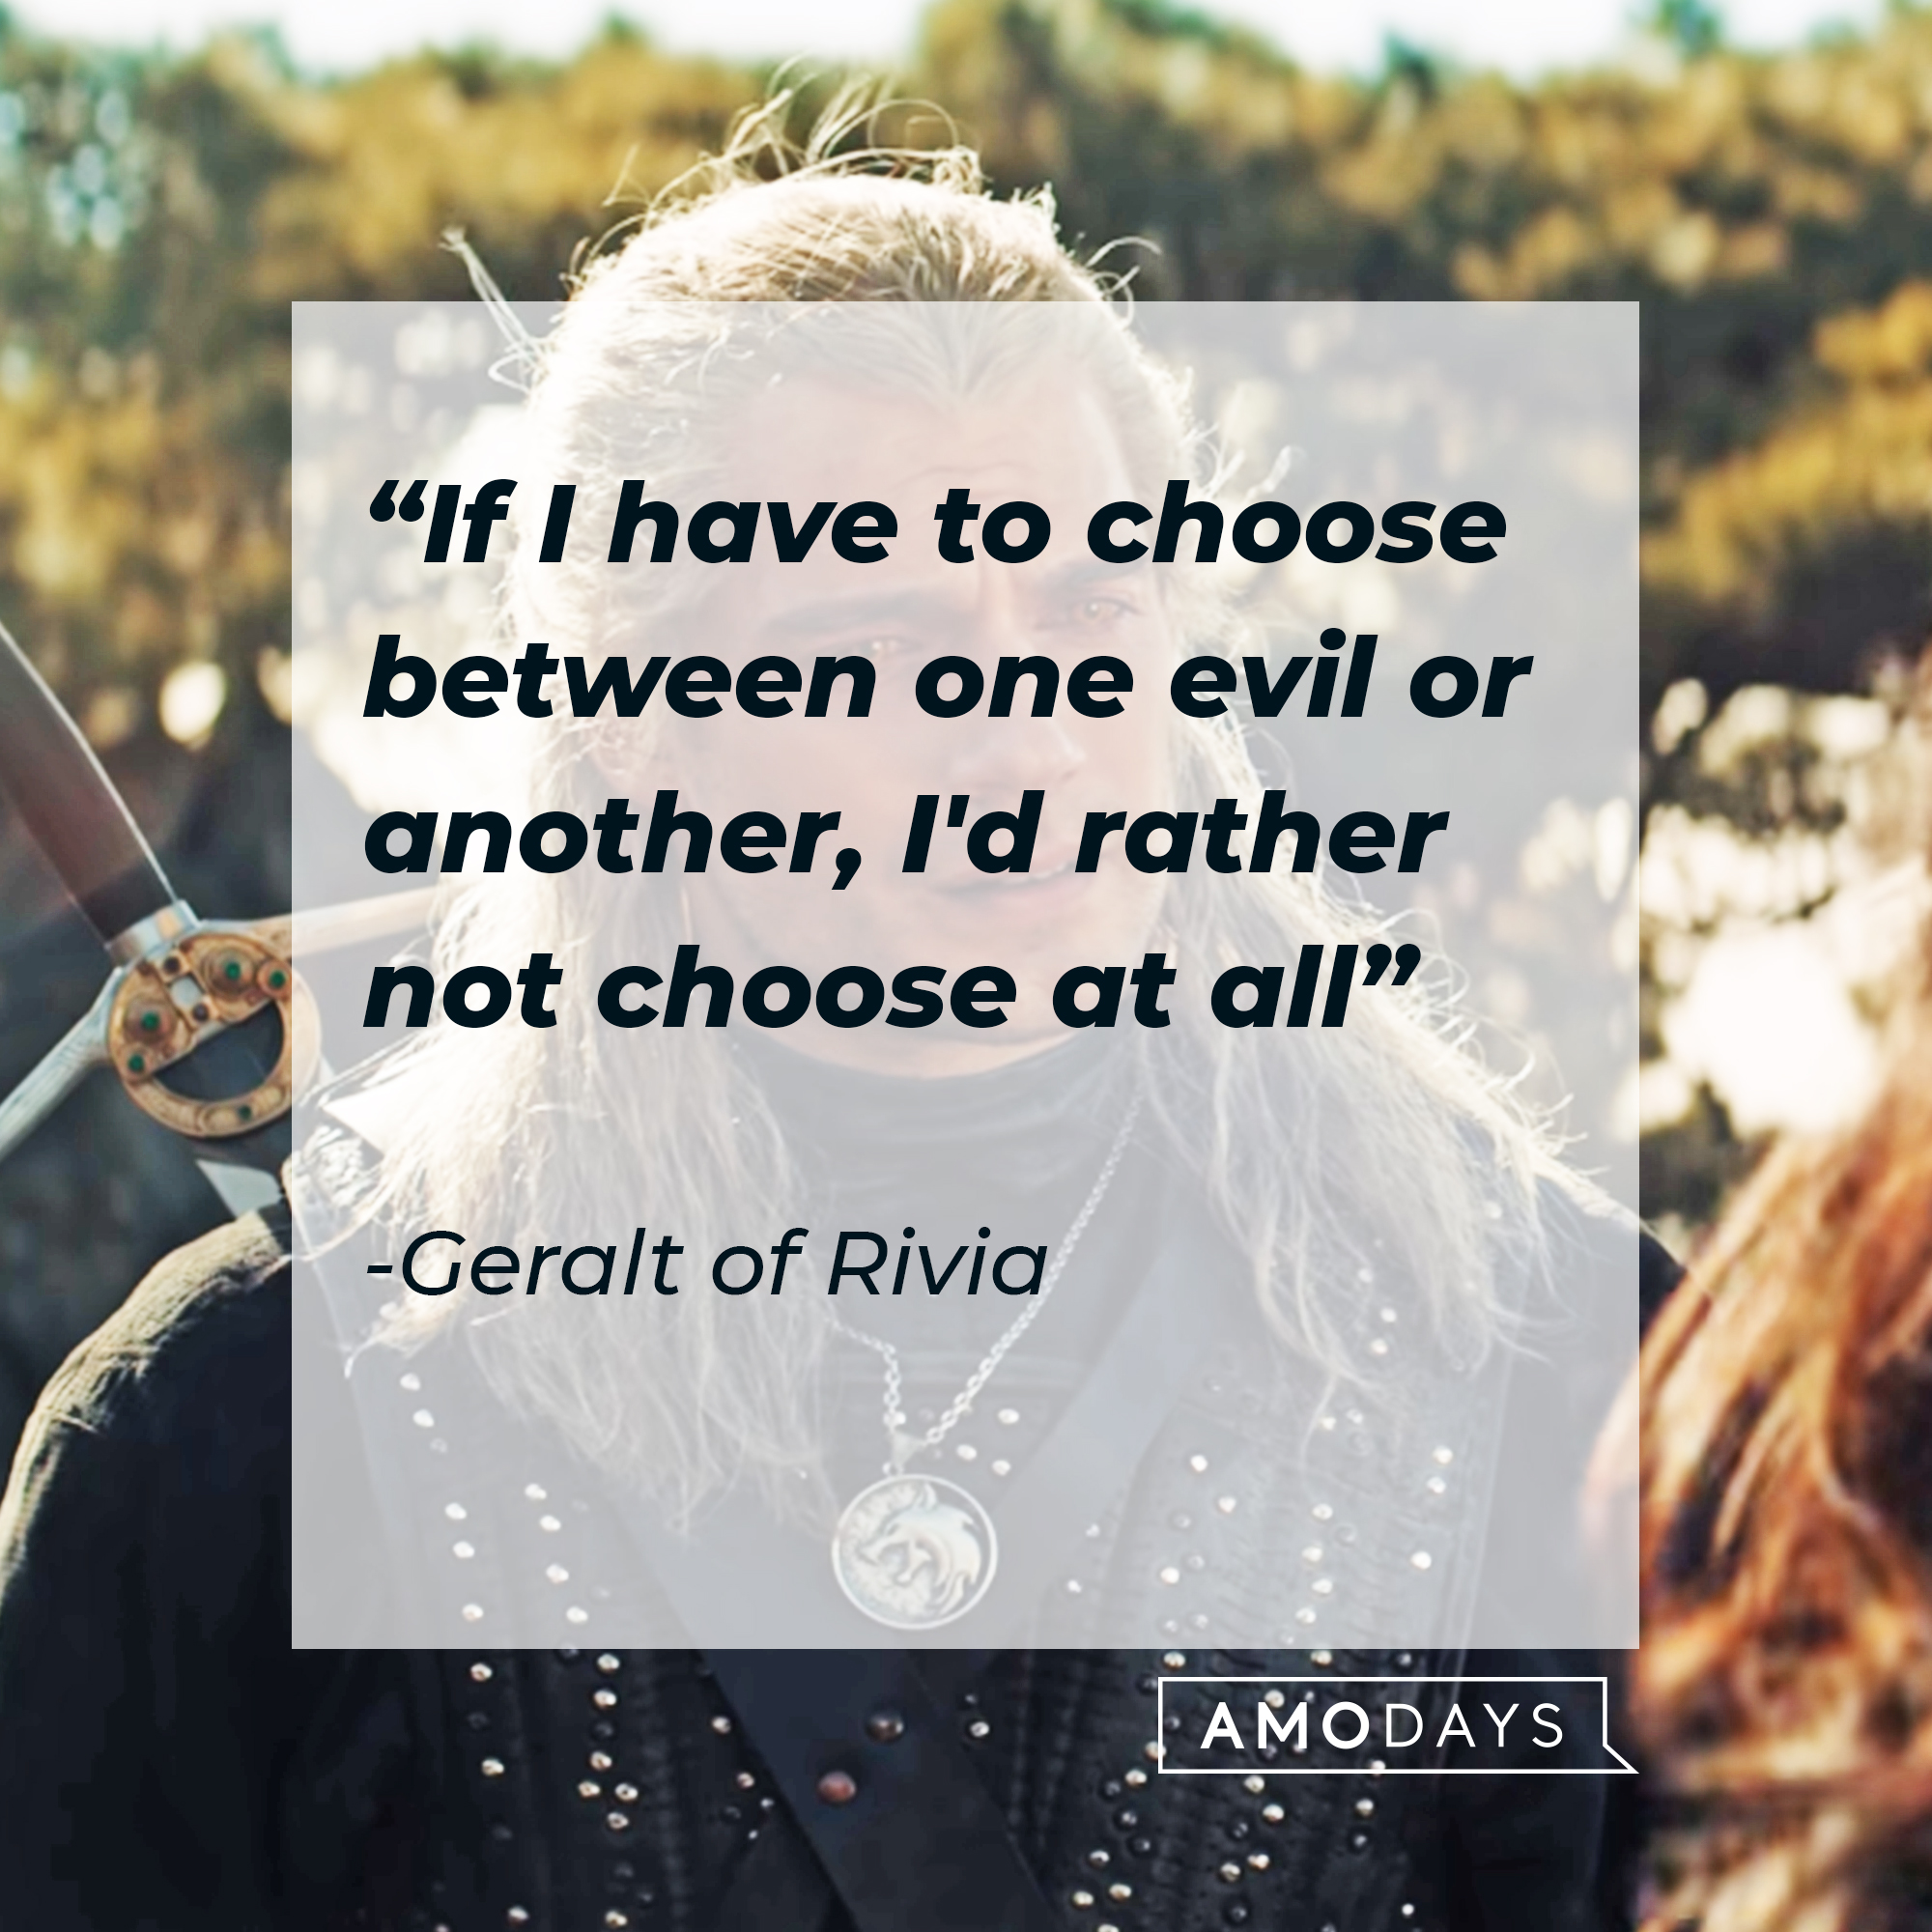 Geralt of Rivia's quote: "If I have to choose between one evil or another, I'd rather not choose at all" | Source: YouTube/Netflix